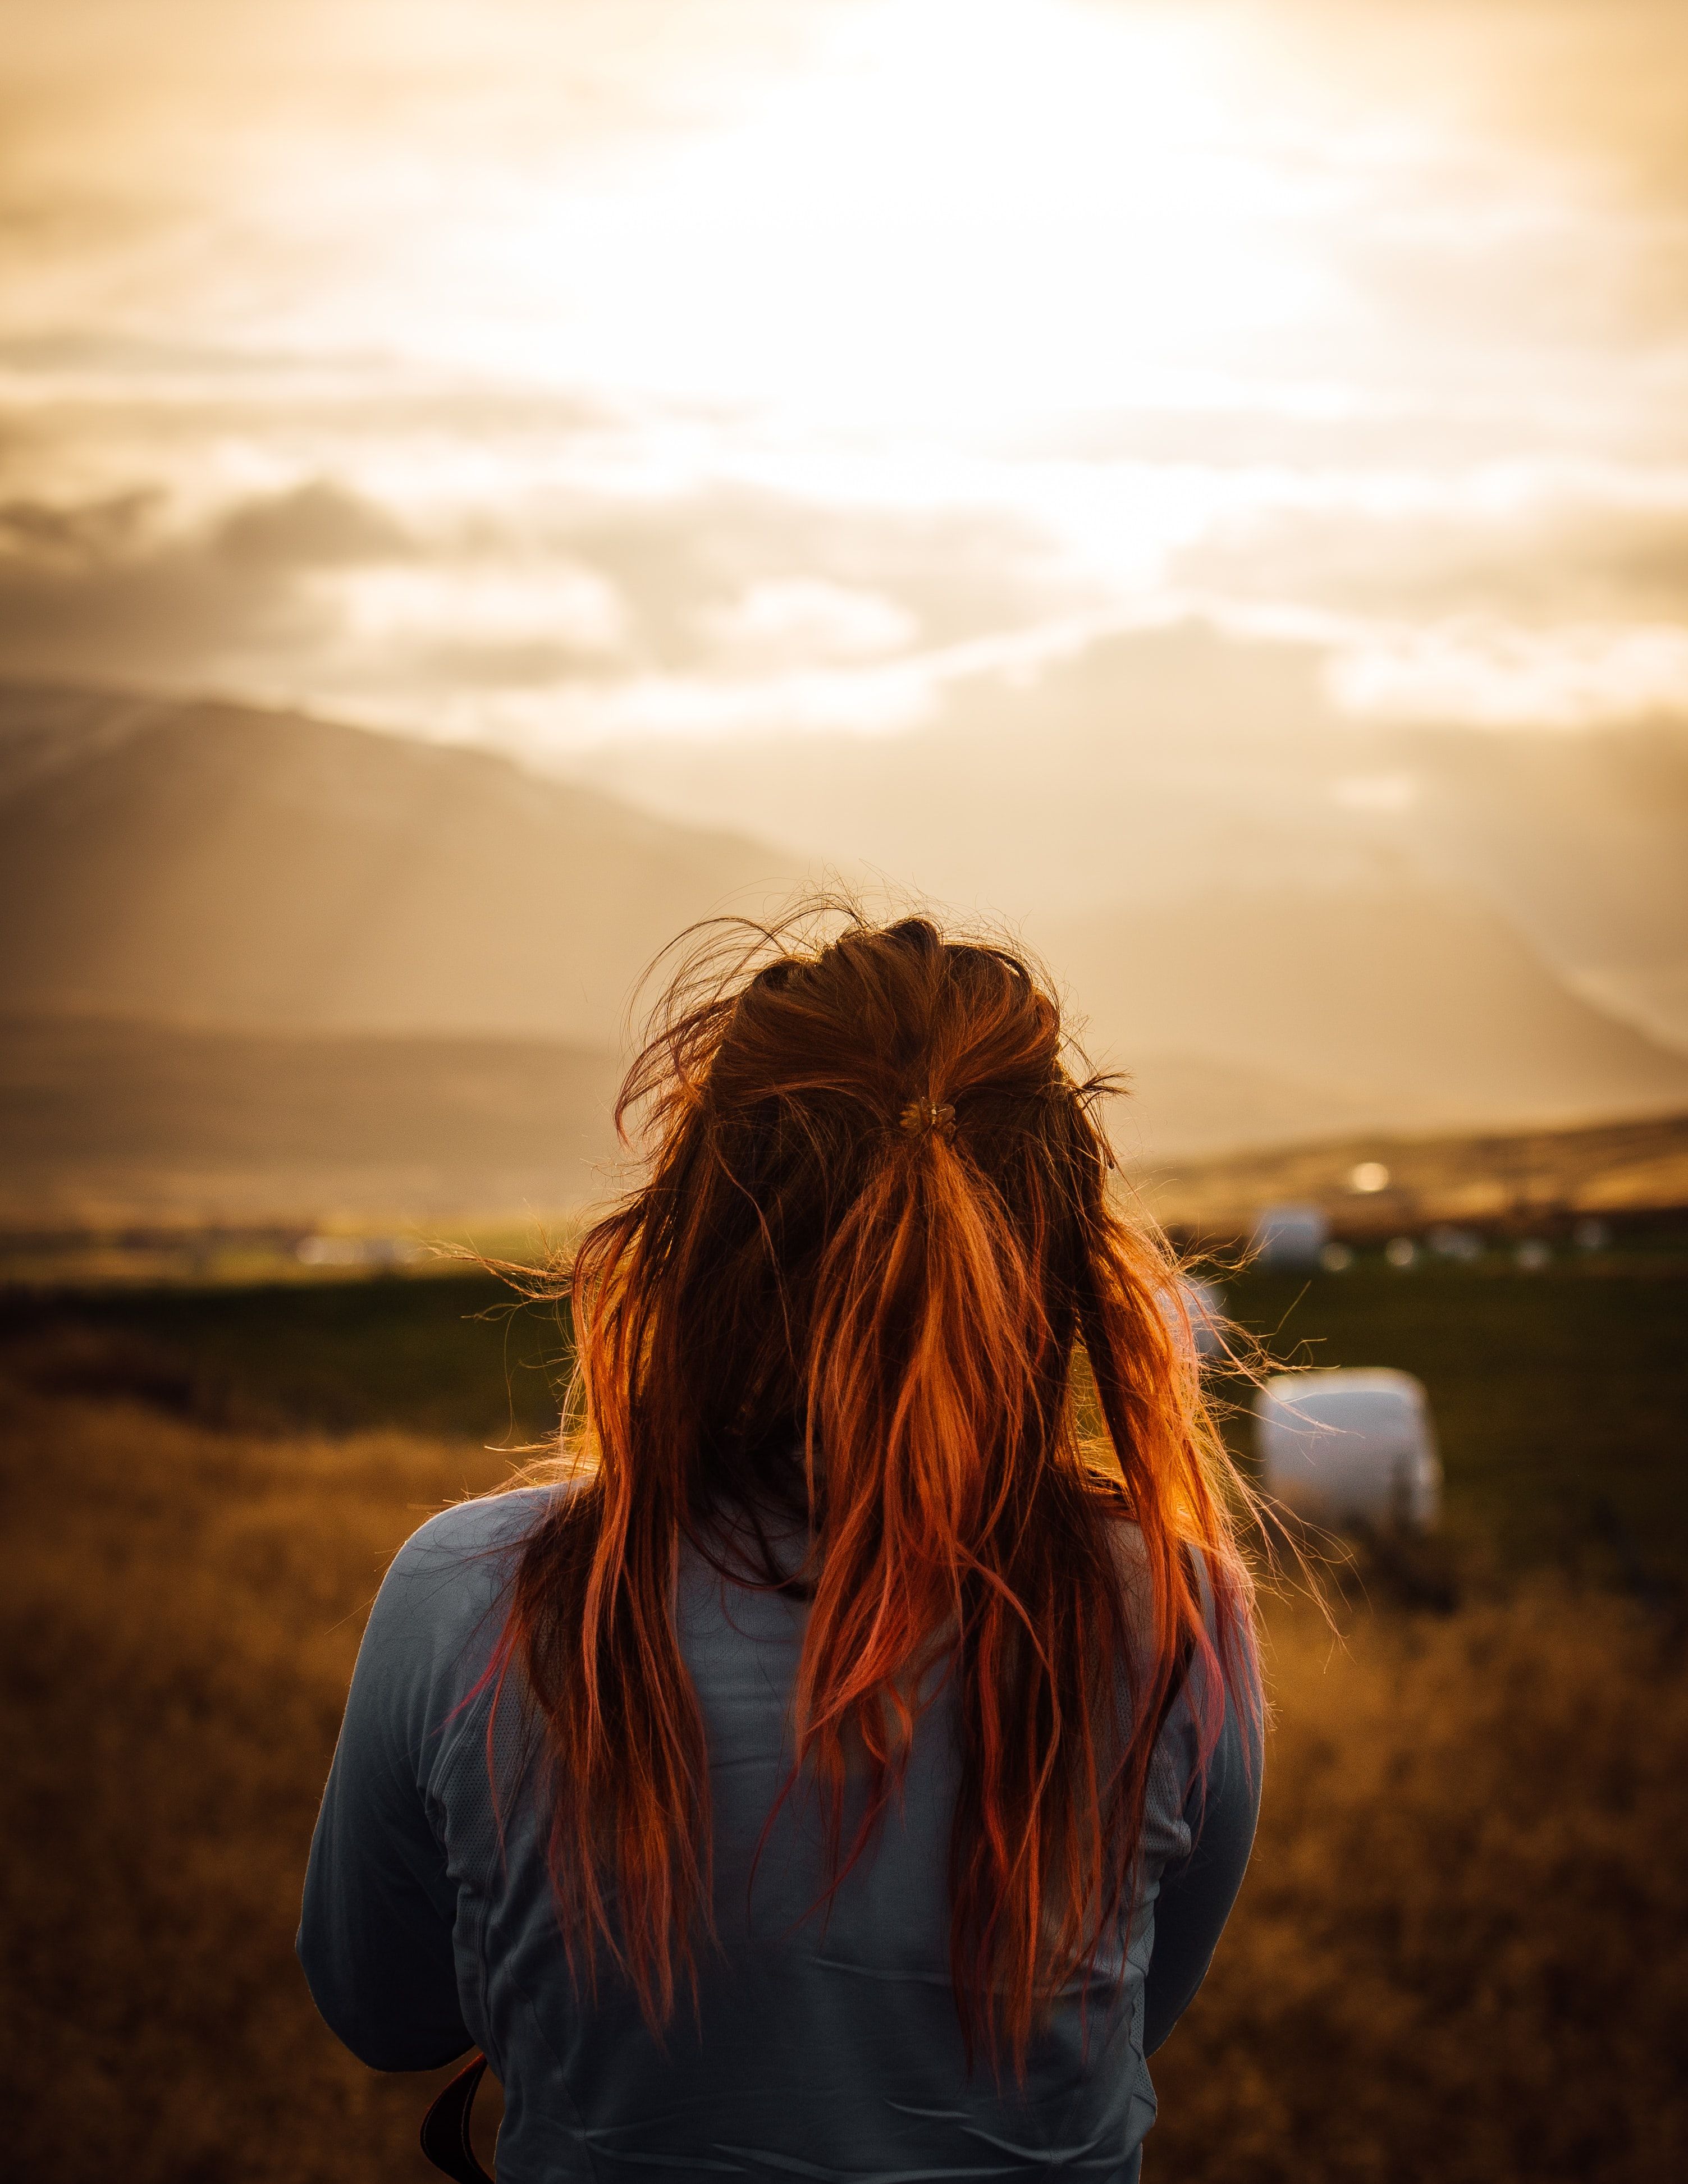 back view of woman facing grass fields photo